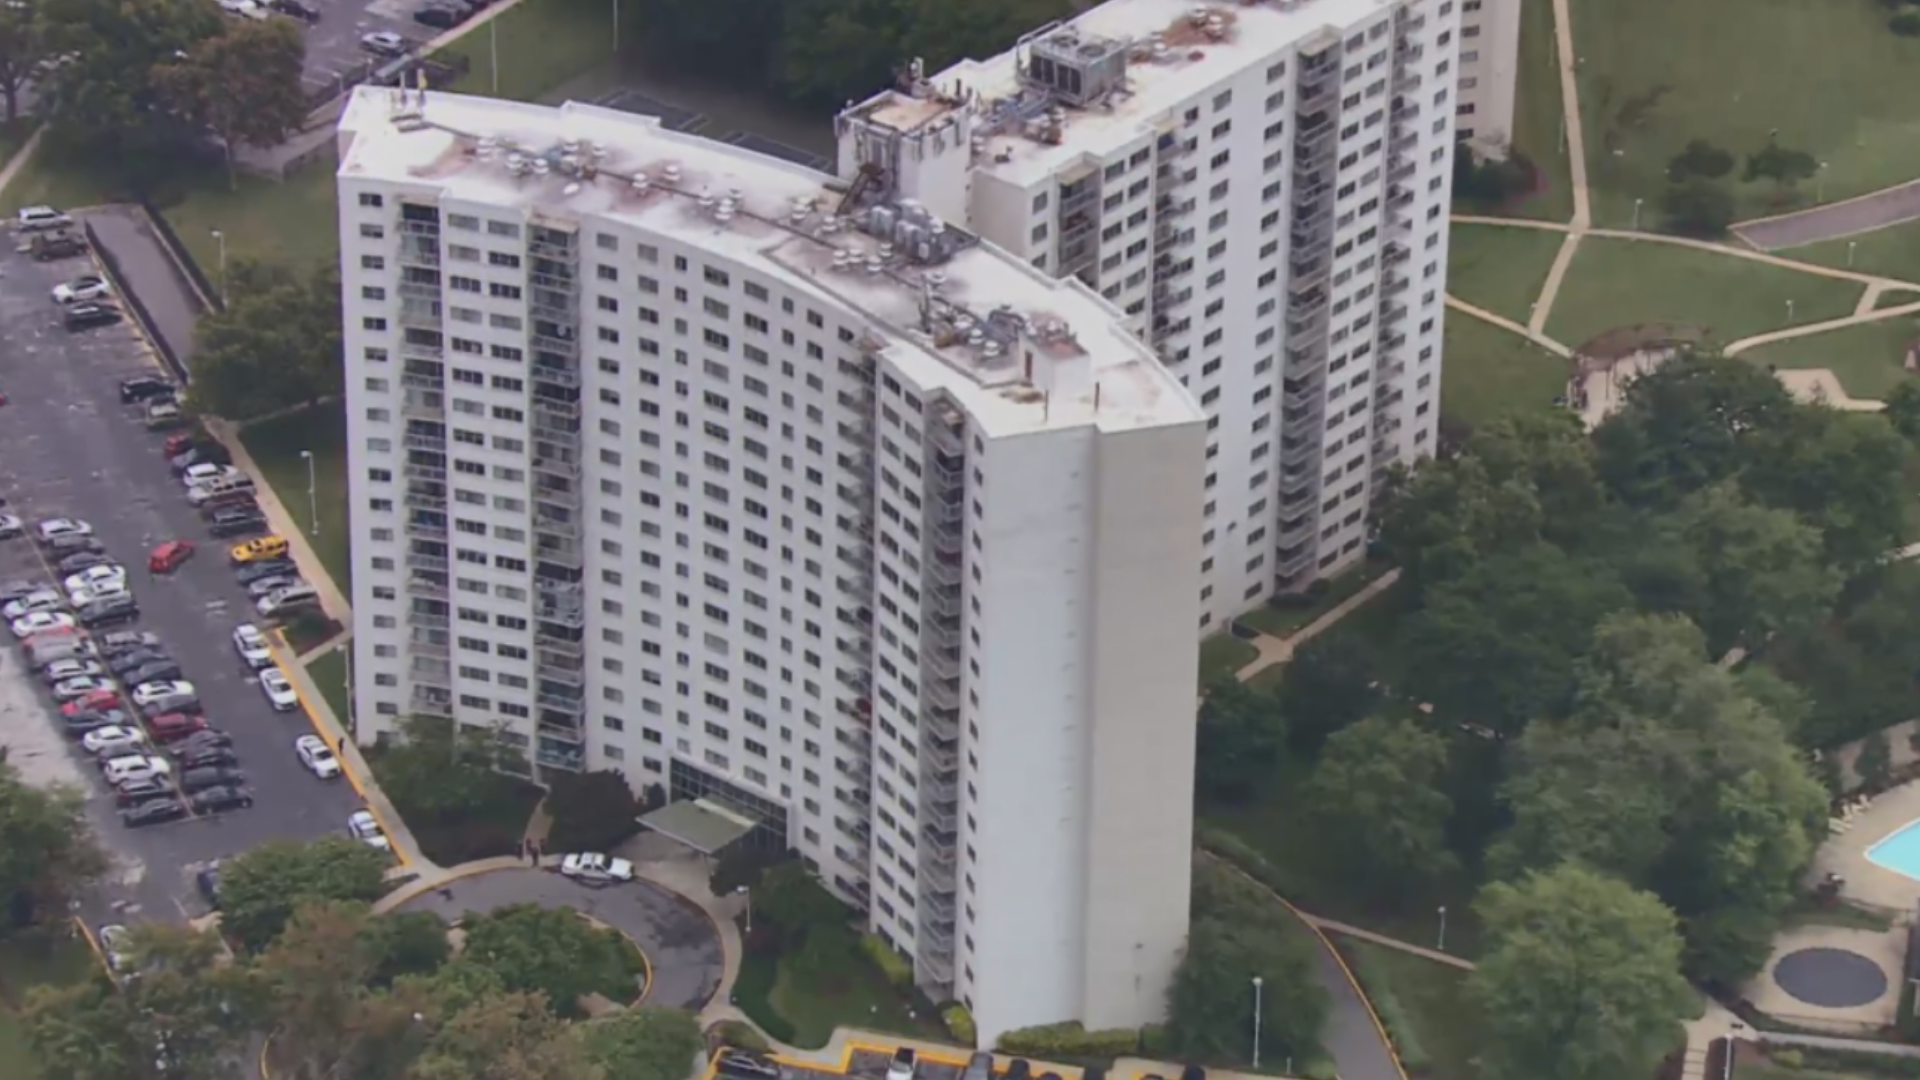 Montgomery County Police say two people were found with gunshot wounds at the Enclave Silver Spring Apartments.